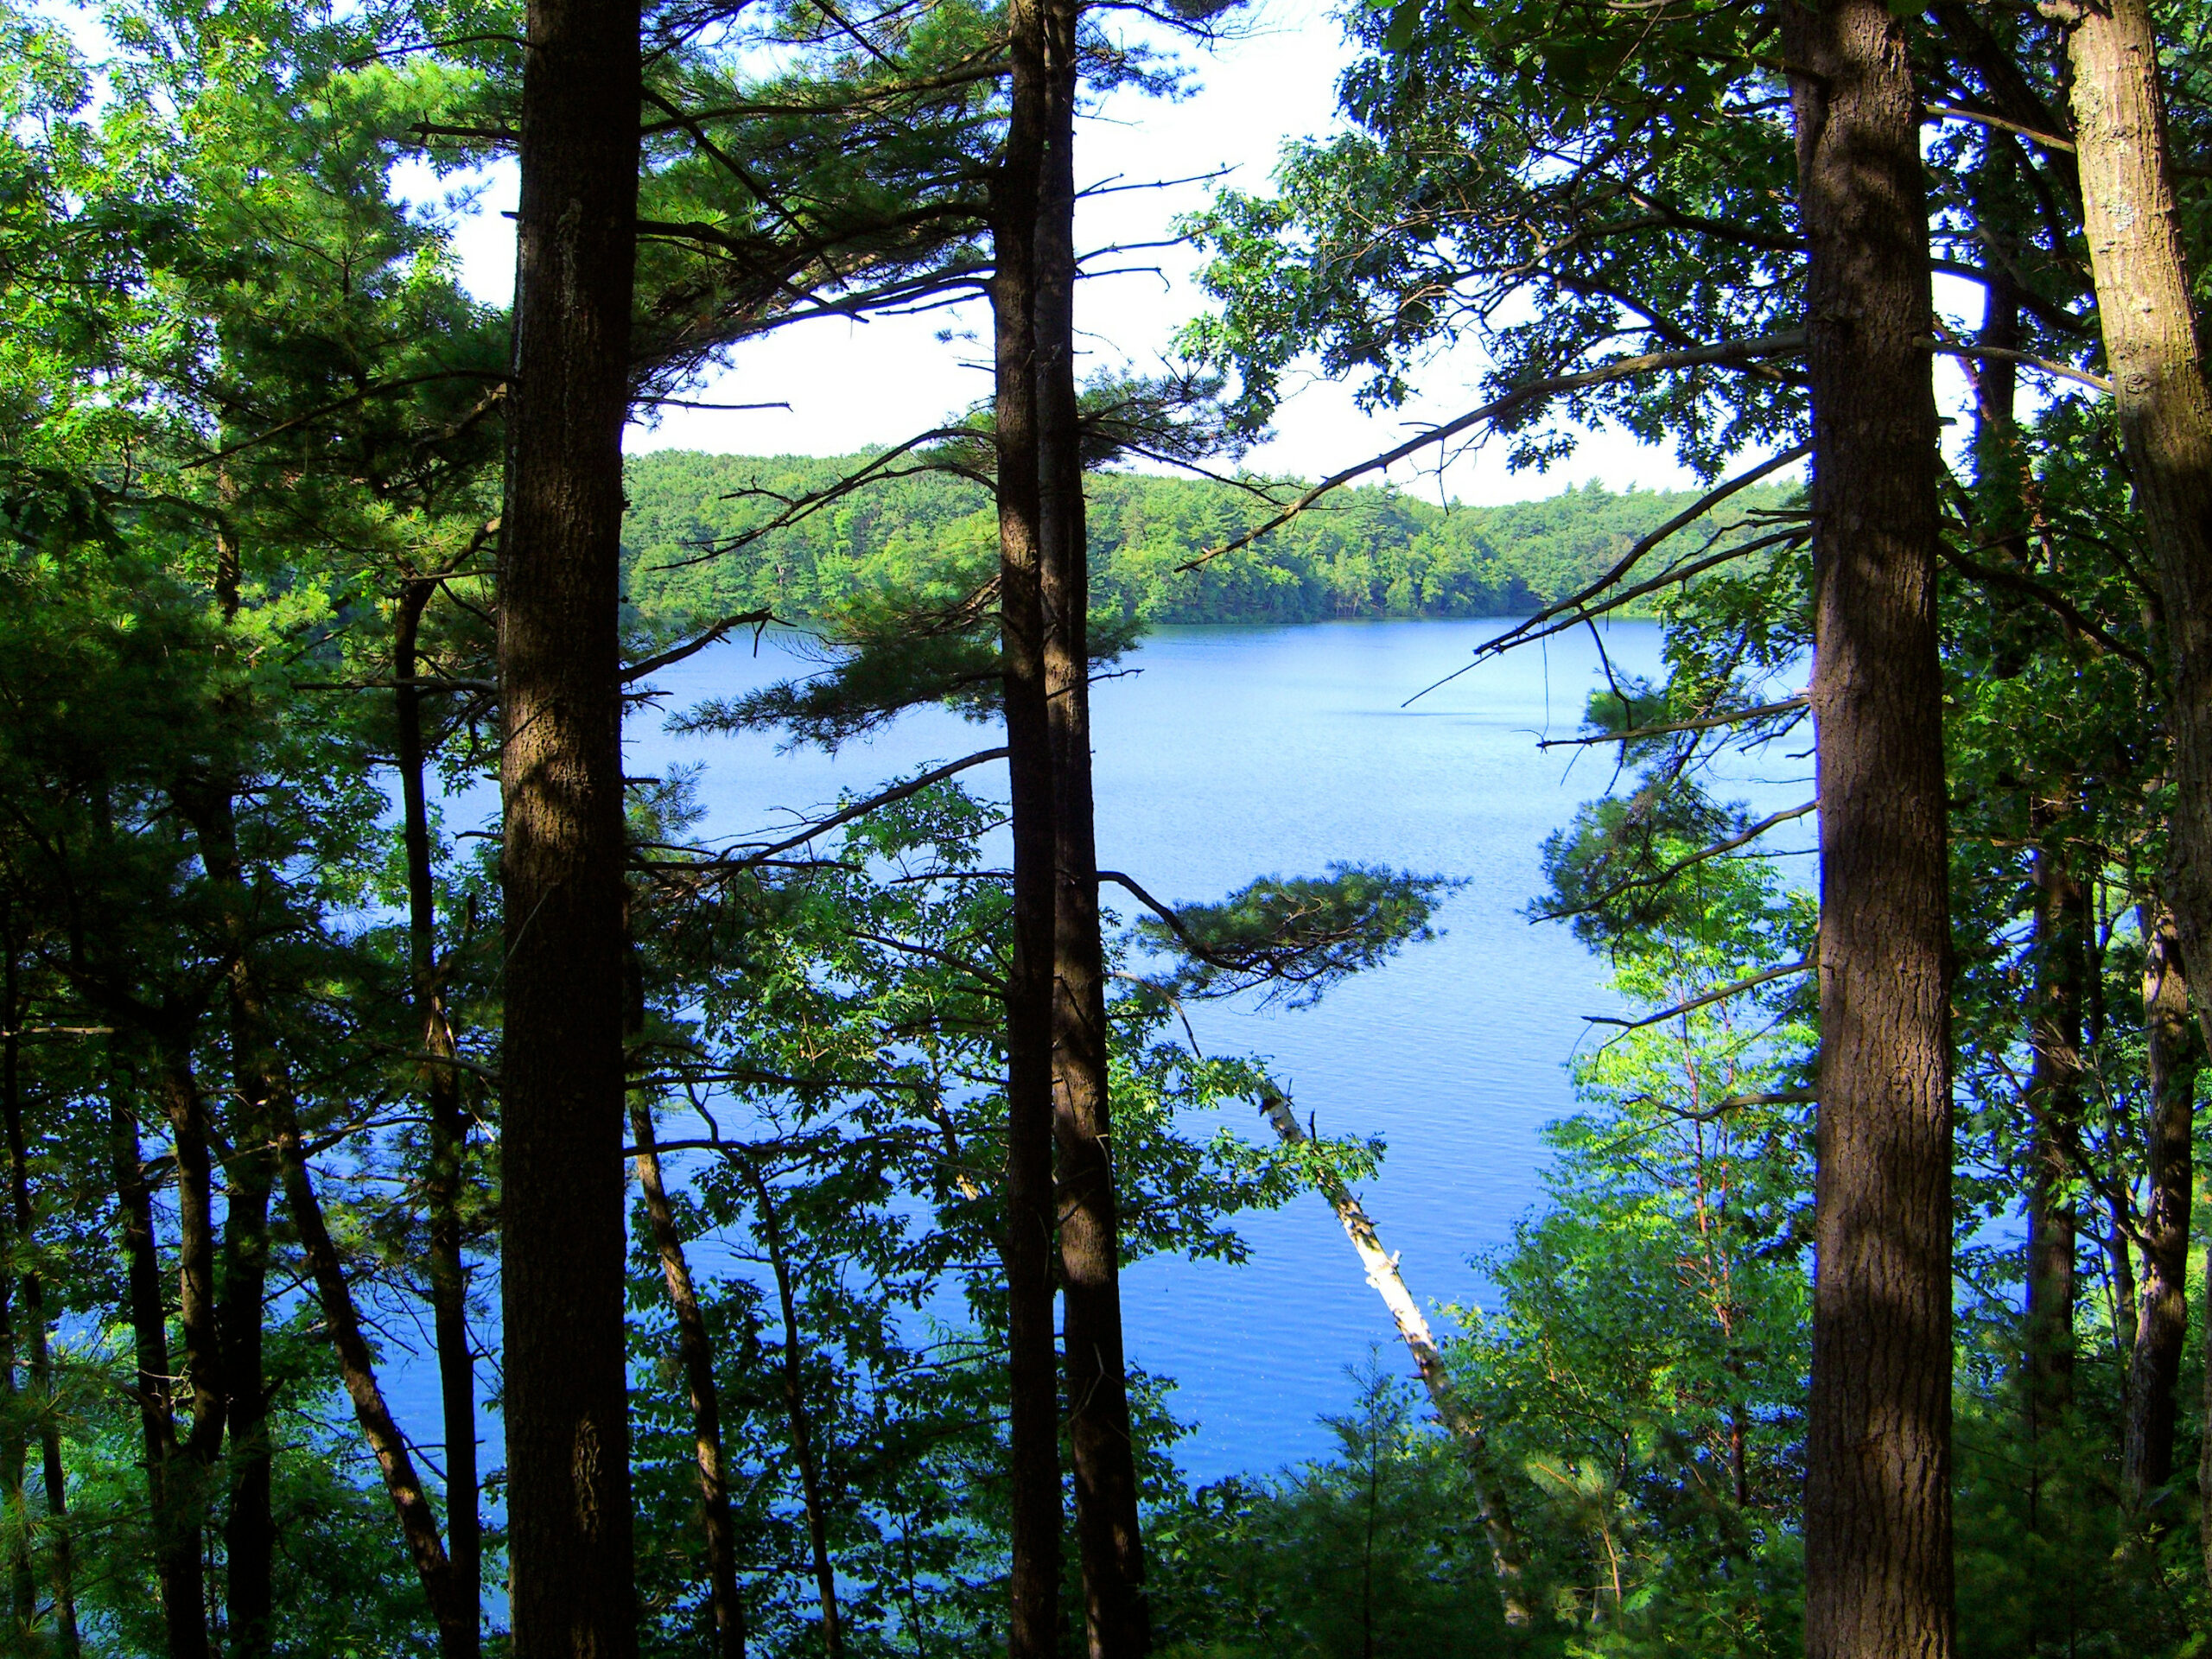 Walden Pond, in Concord, Massachusetts, is the location where Henry David Thoreau wrote his most famous work.